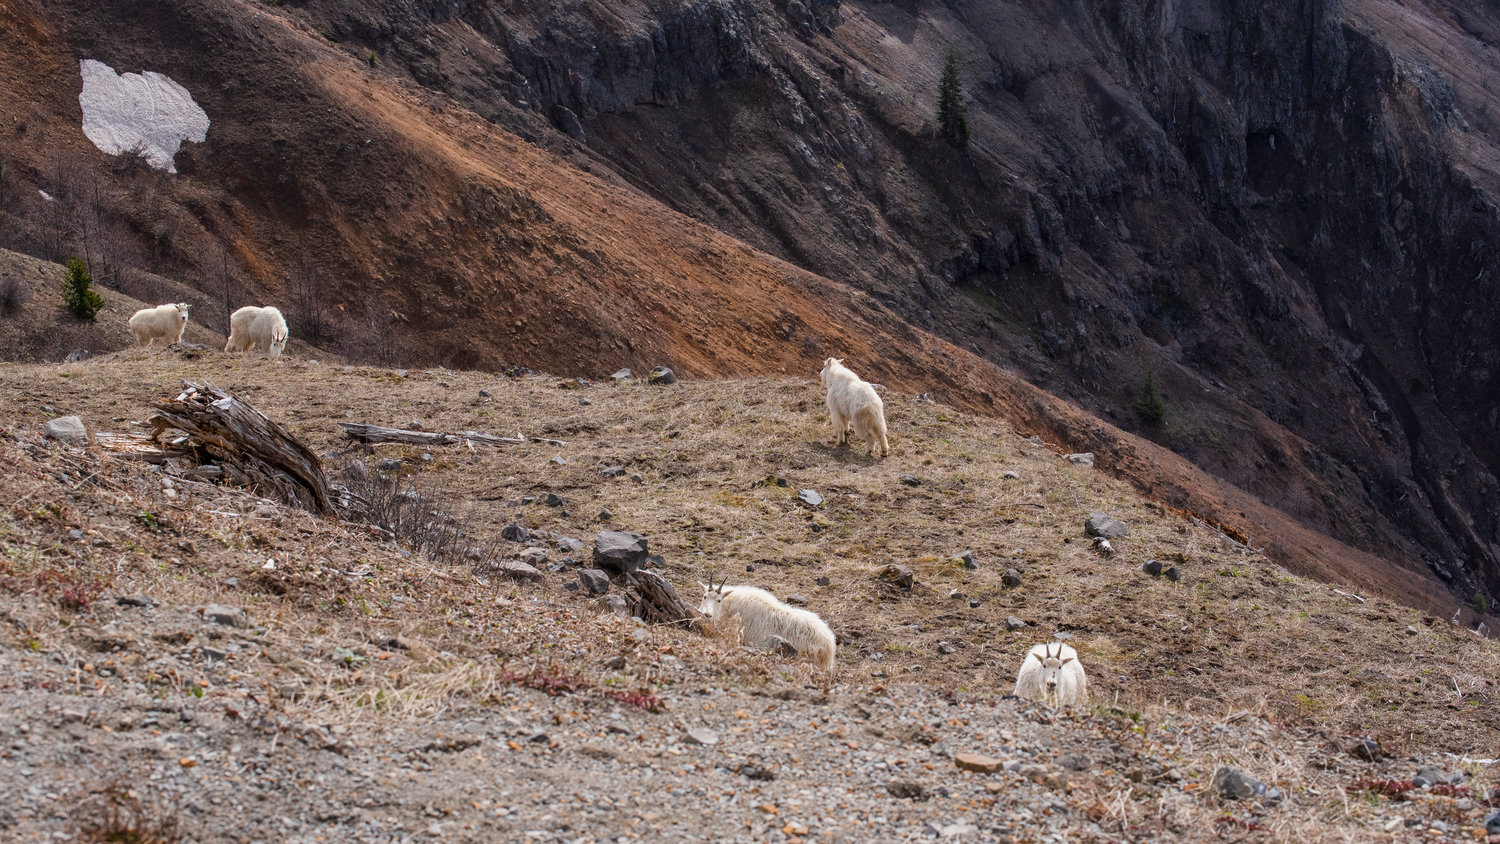 Mount Goats are pictured near the Johnston Ridge Observatory at Mount St. Helens on Tuesday, March 29, 2022.